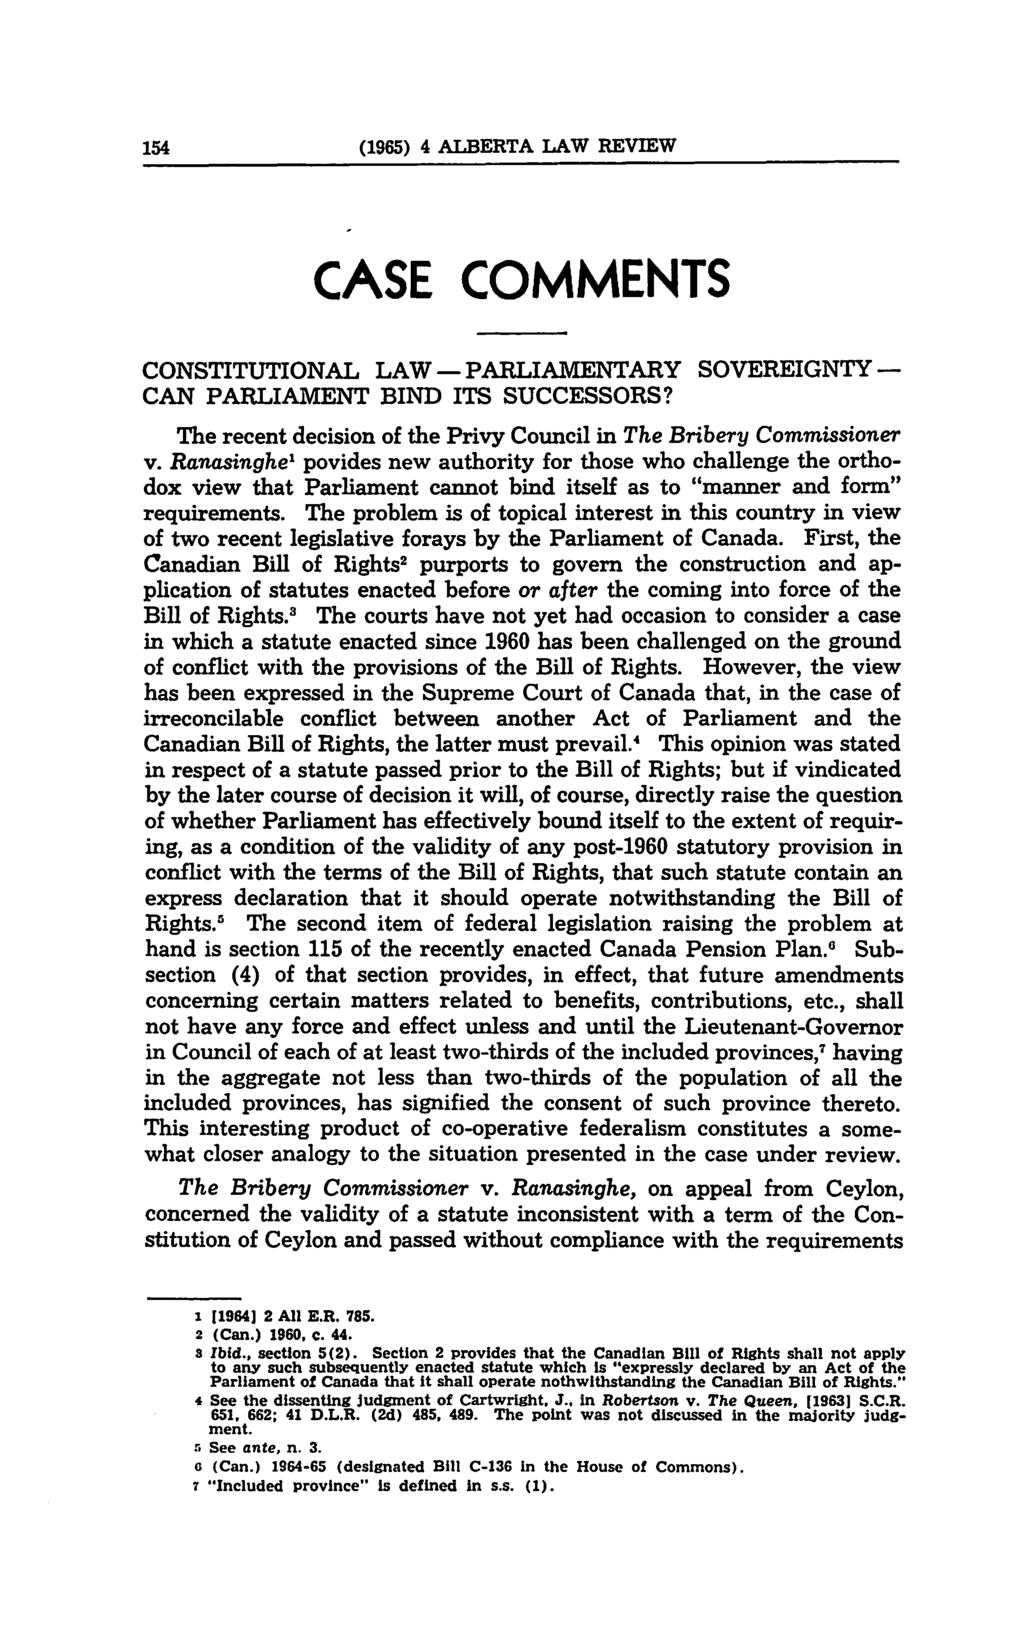 154 (1965) 4 ALBERTA LAW REVIEW CASE COMMENTS CONSTITUTIONAL LAW - PARLIAMENTARY SOVEREIGNTY - CAN PARLIAMENT BIND ITS SUCCESSORS?